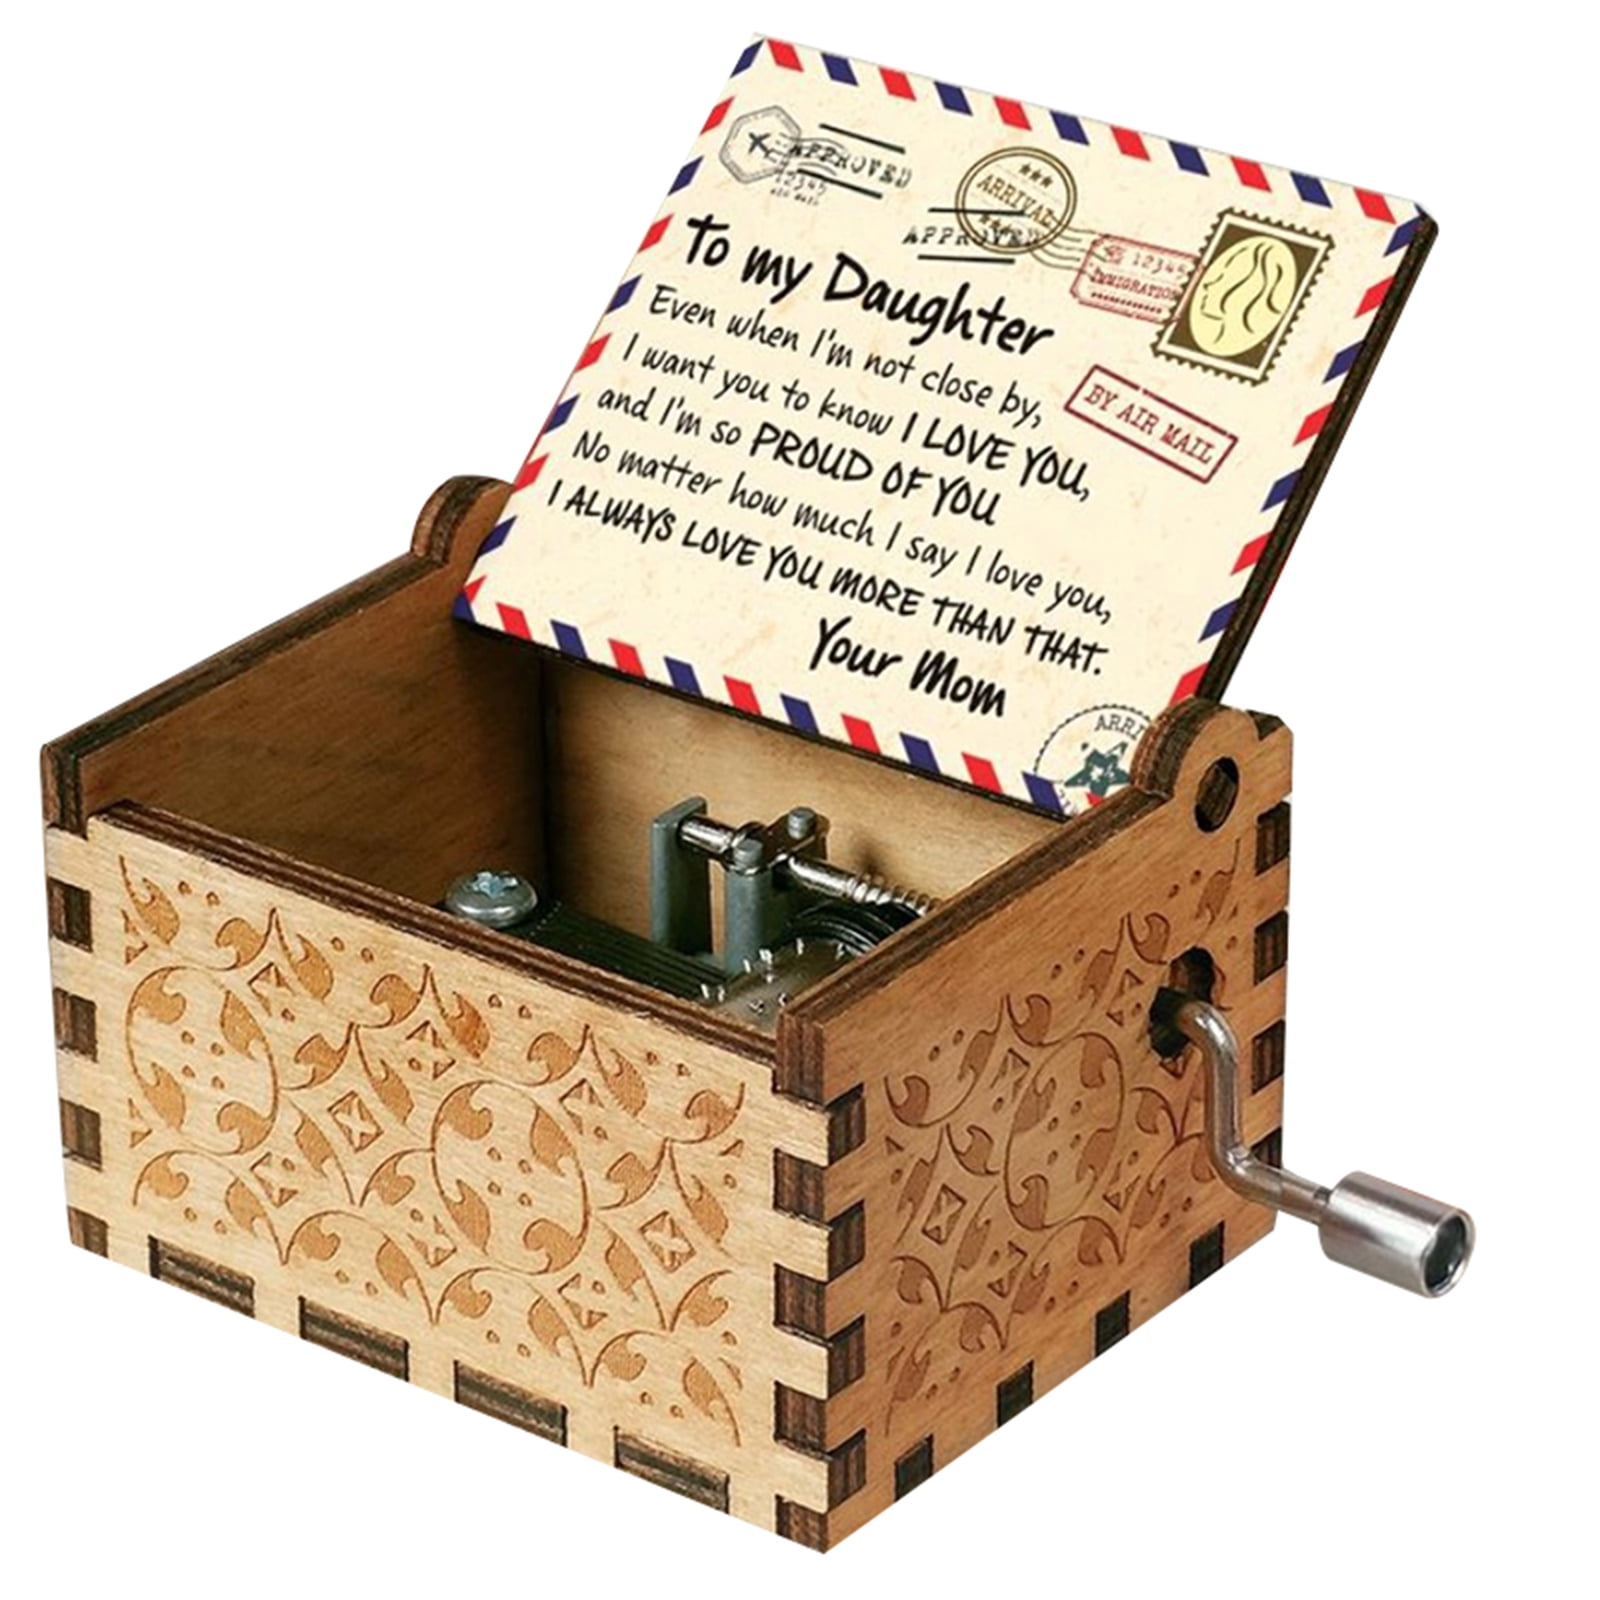 Play "You Are My Sunshine" Wooden Vintage Music Box With Sankyo Musical Movement 